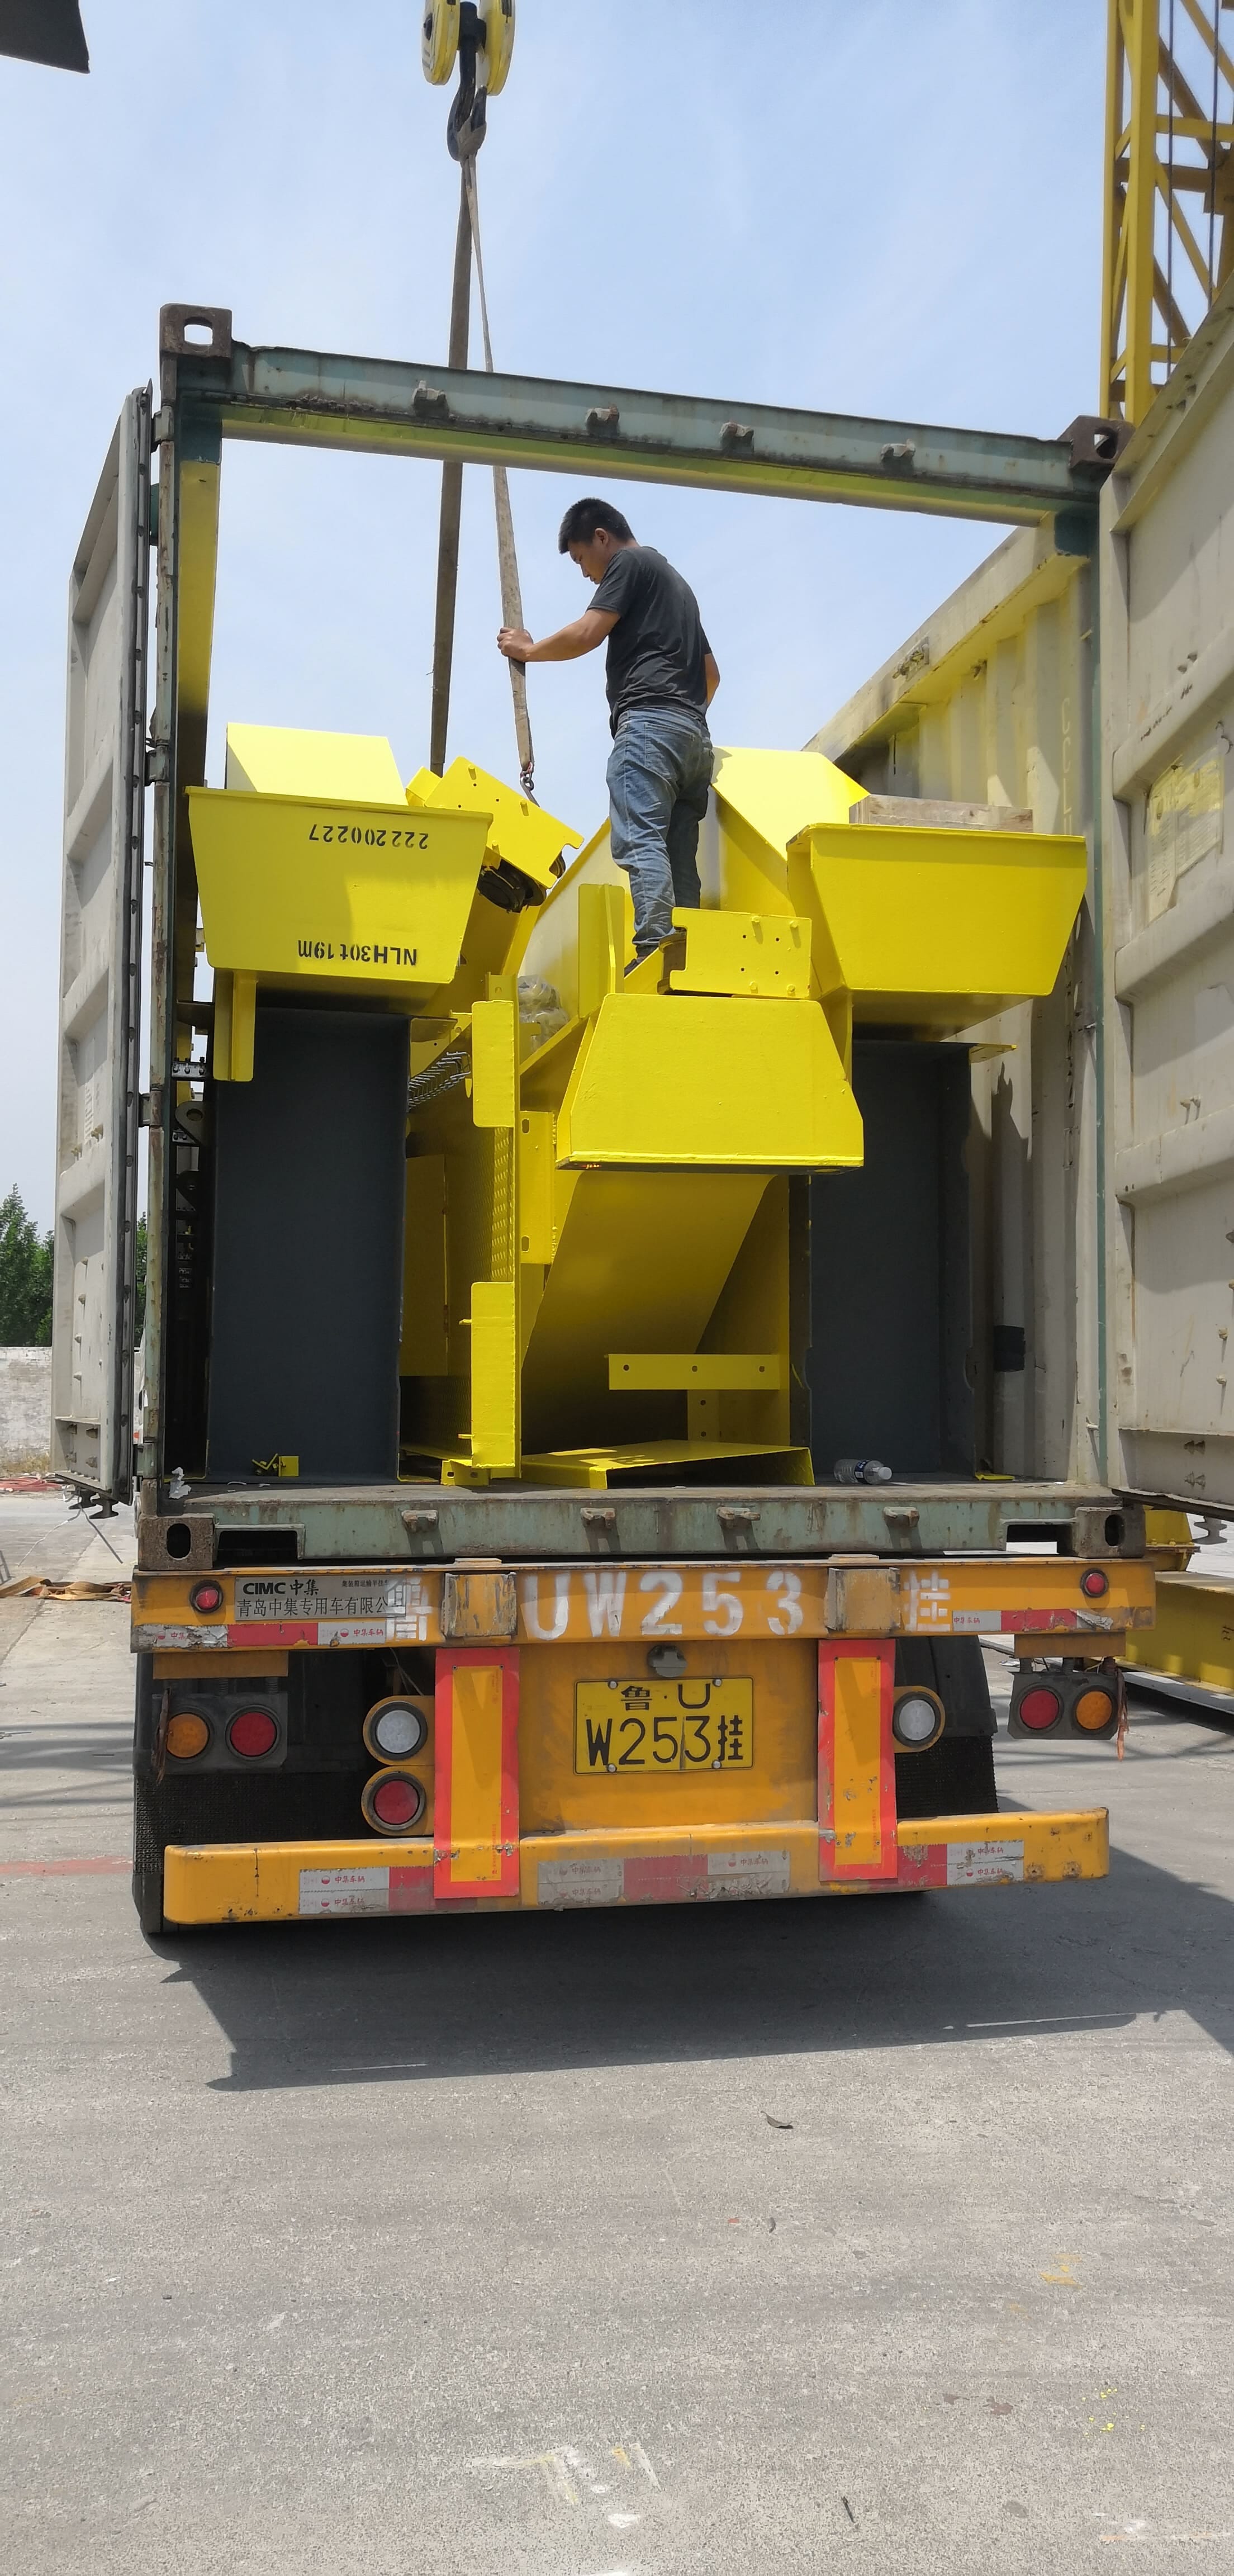 11 Sets Of NLH Overhead Crane Exported to Qatar5